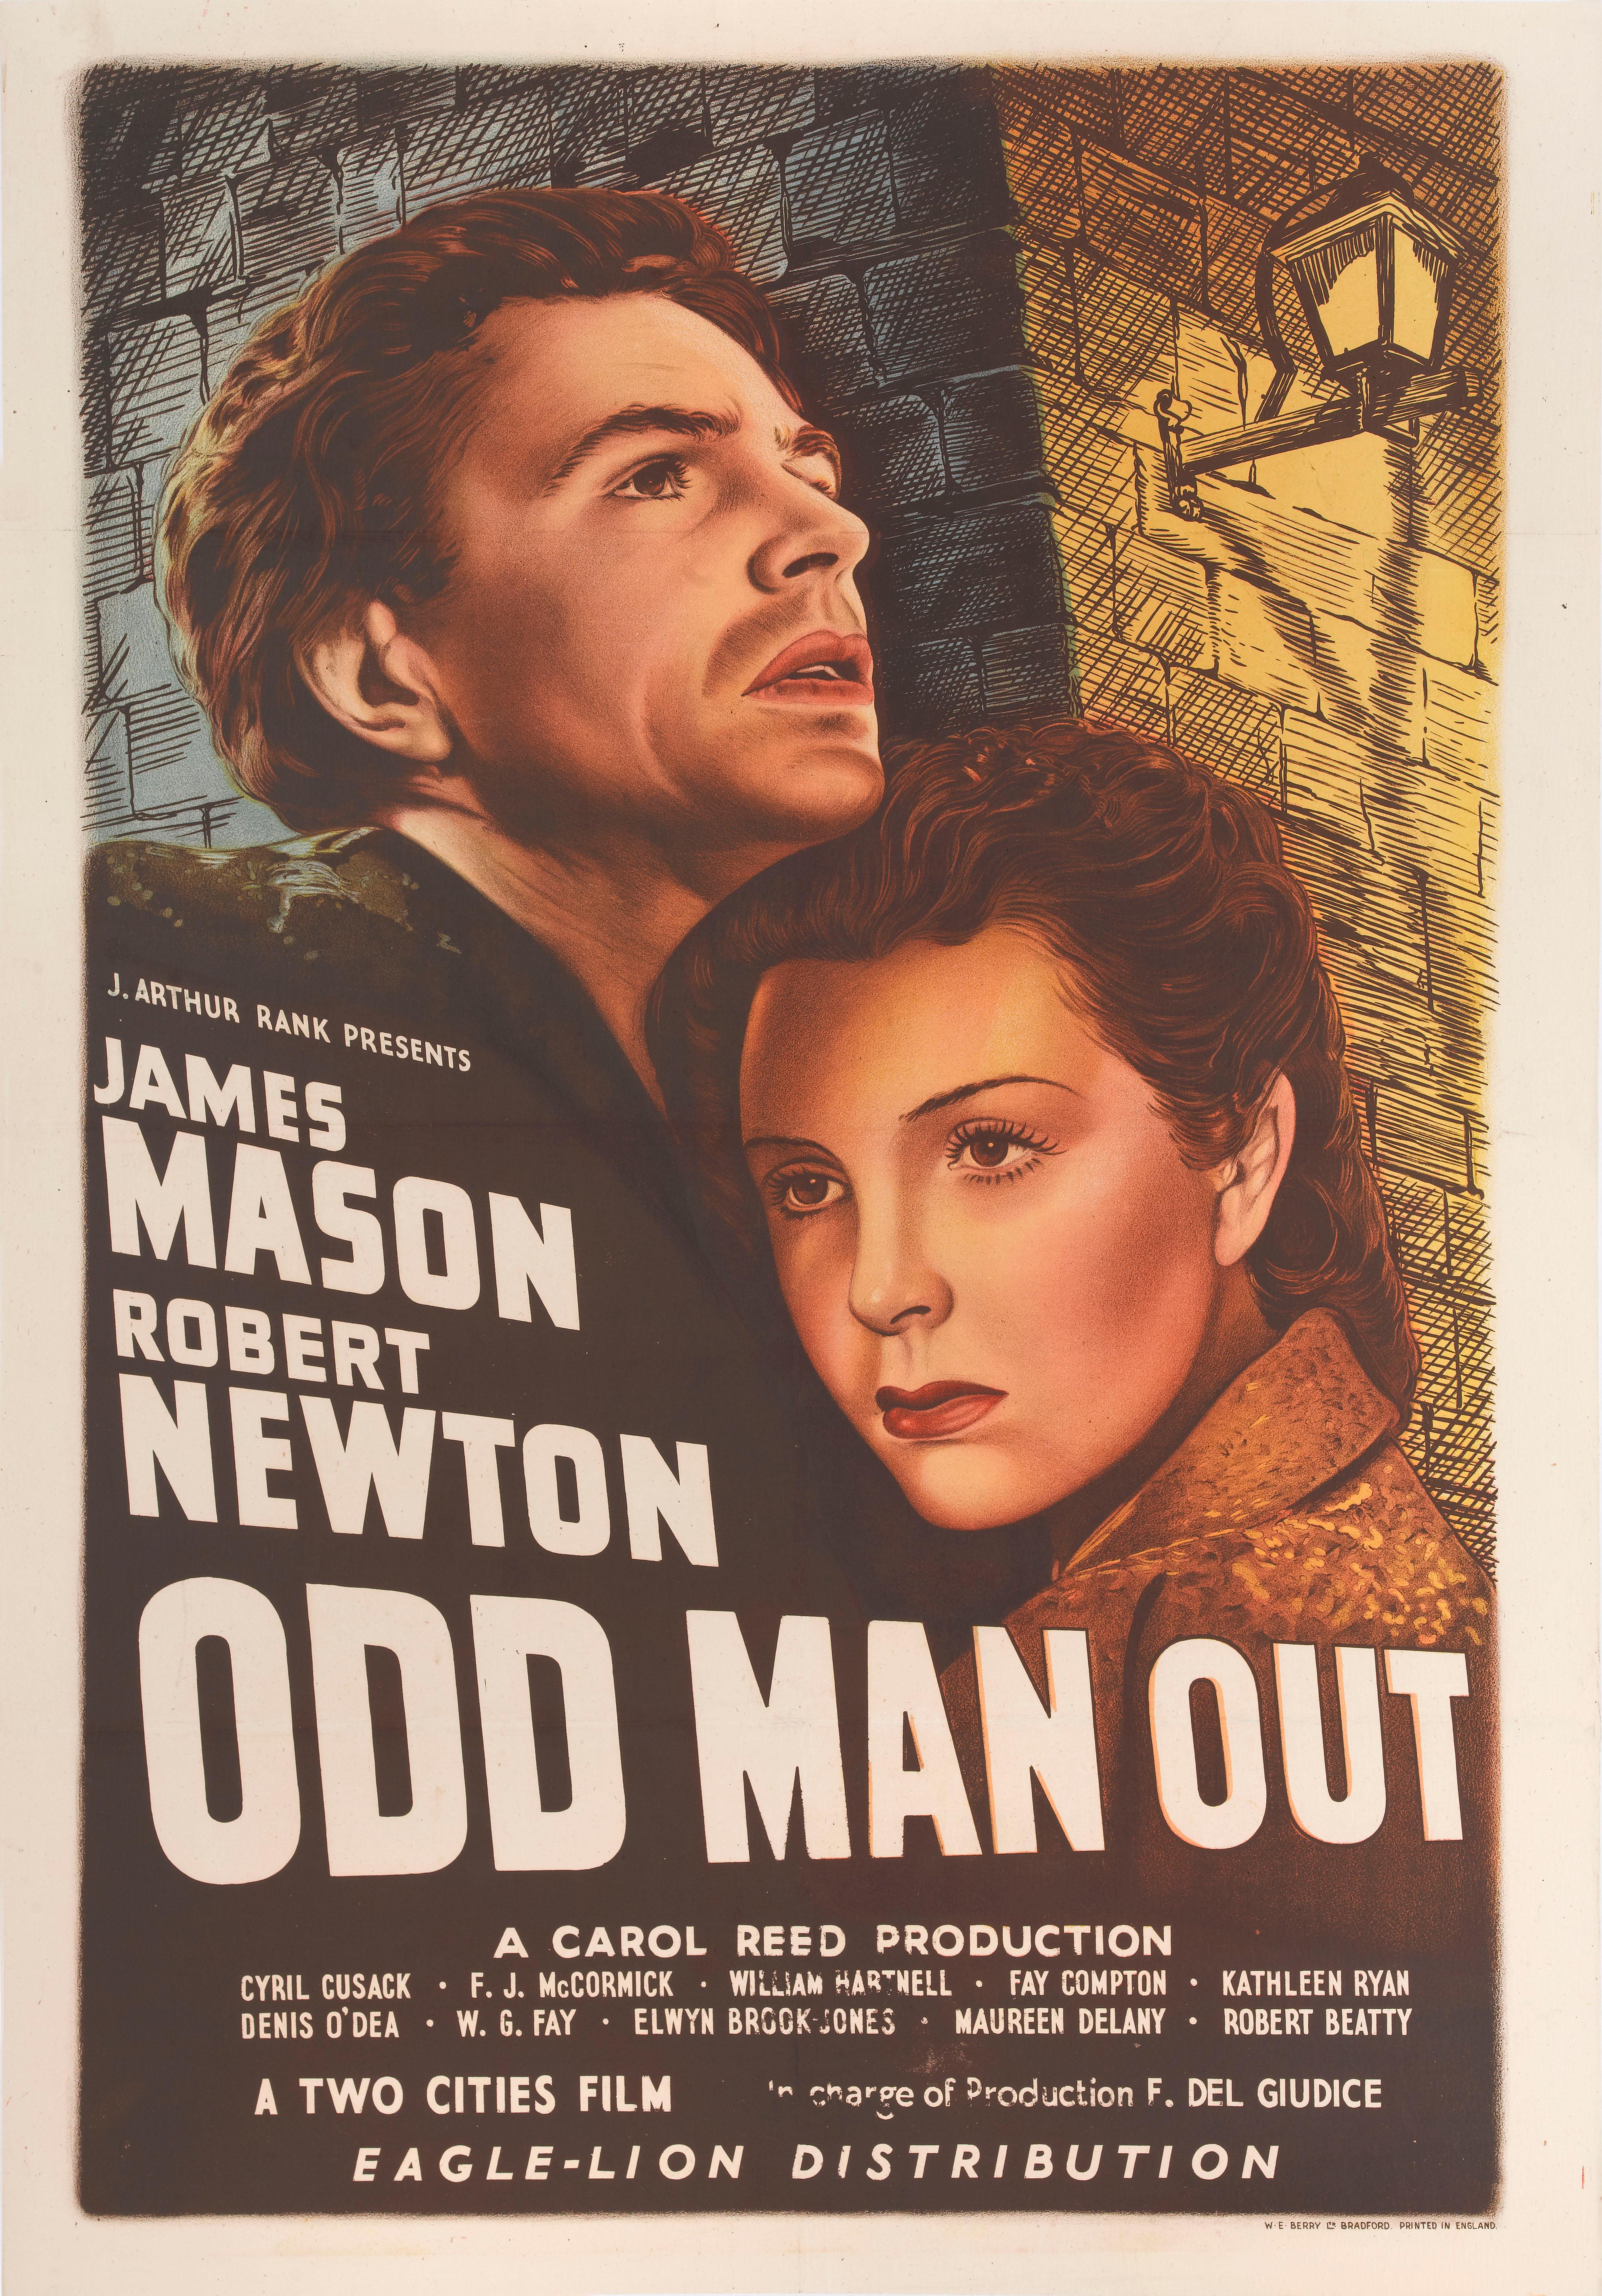 Original British Film poster from the first release of the film in the UK in 1948
Odd Man Out is a classic British film that fits the film noir definition in almost every respect. It's one of the milestones of its era, highlighted by what is